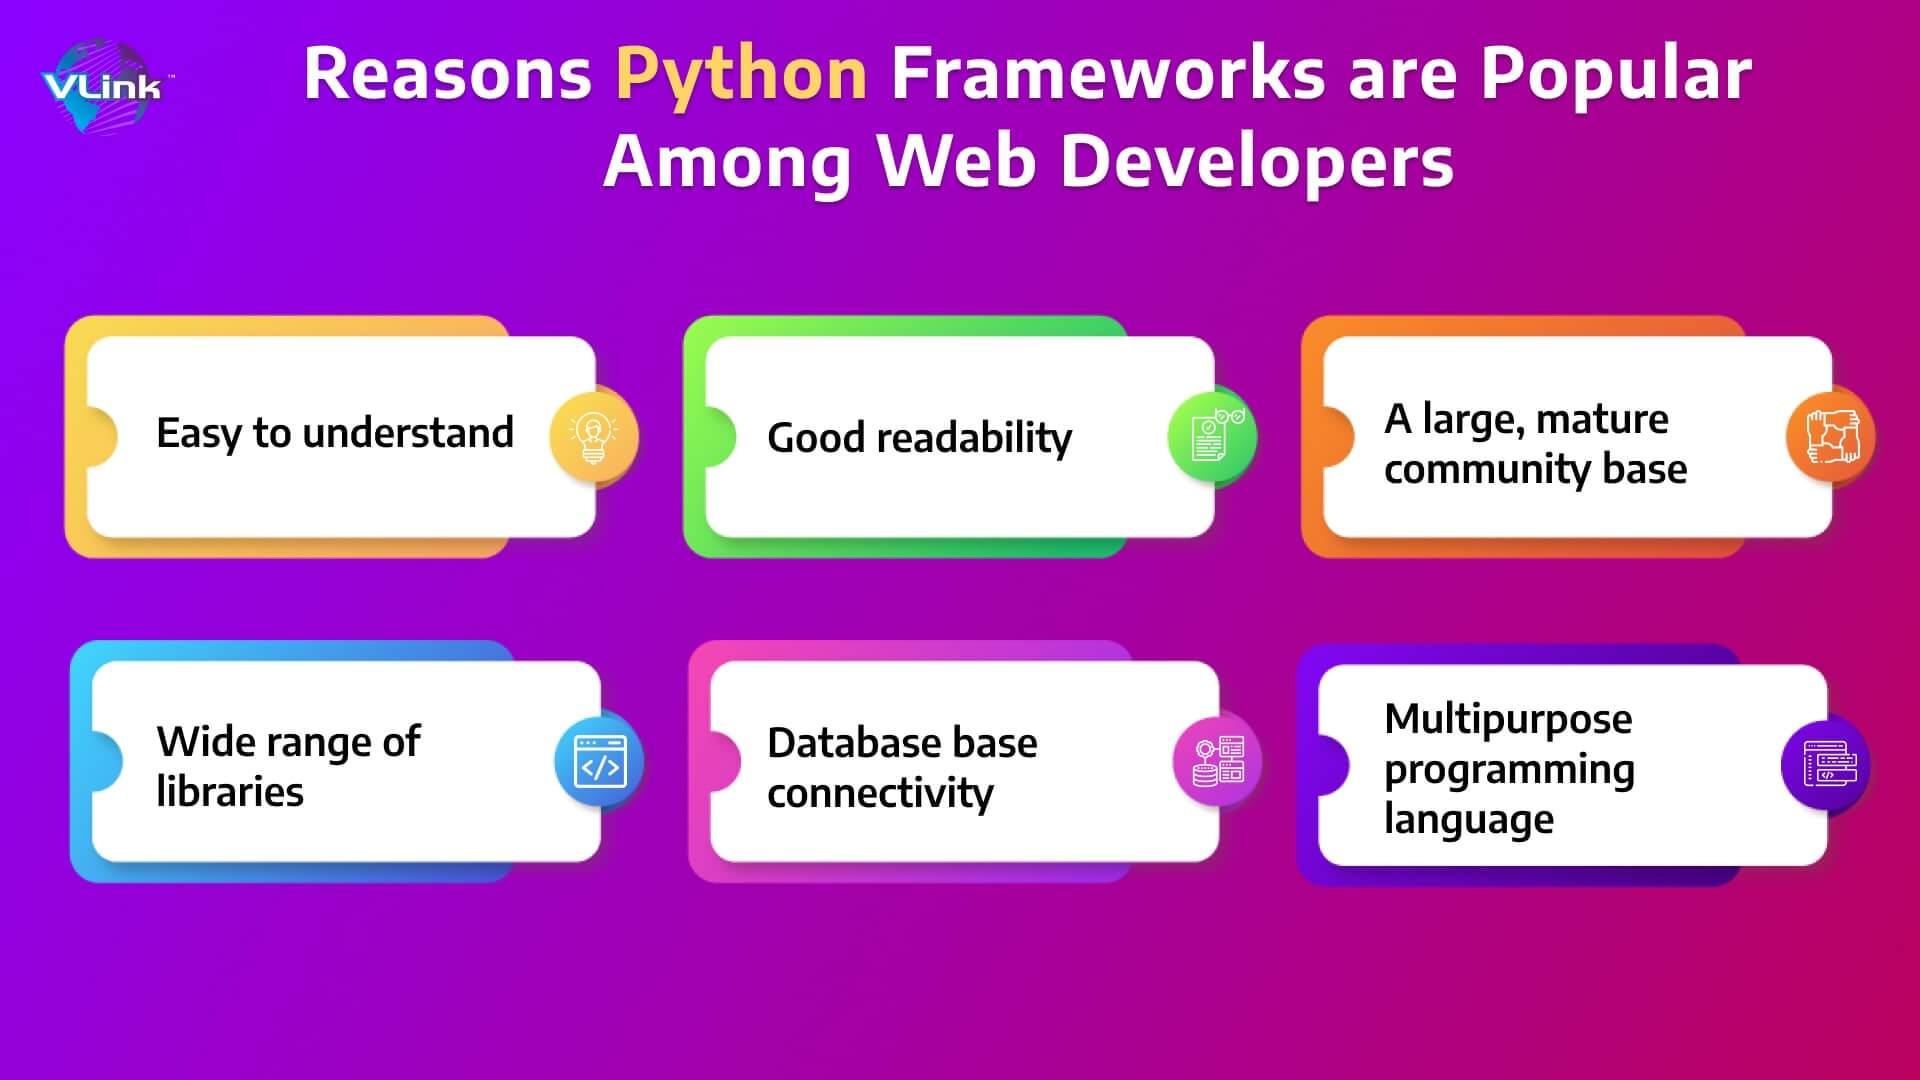 Why is Python so Popular with Web Developers